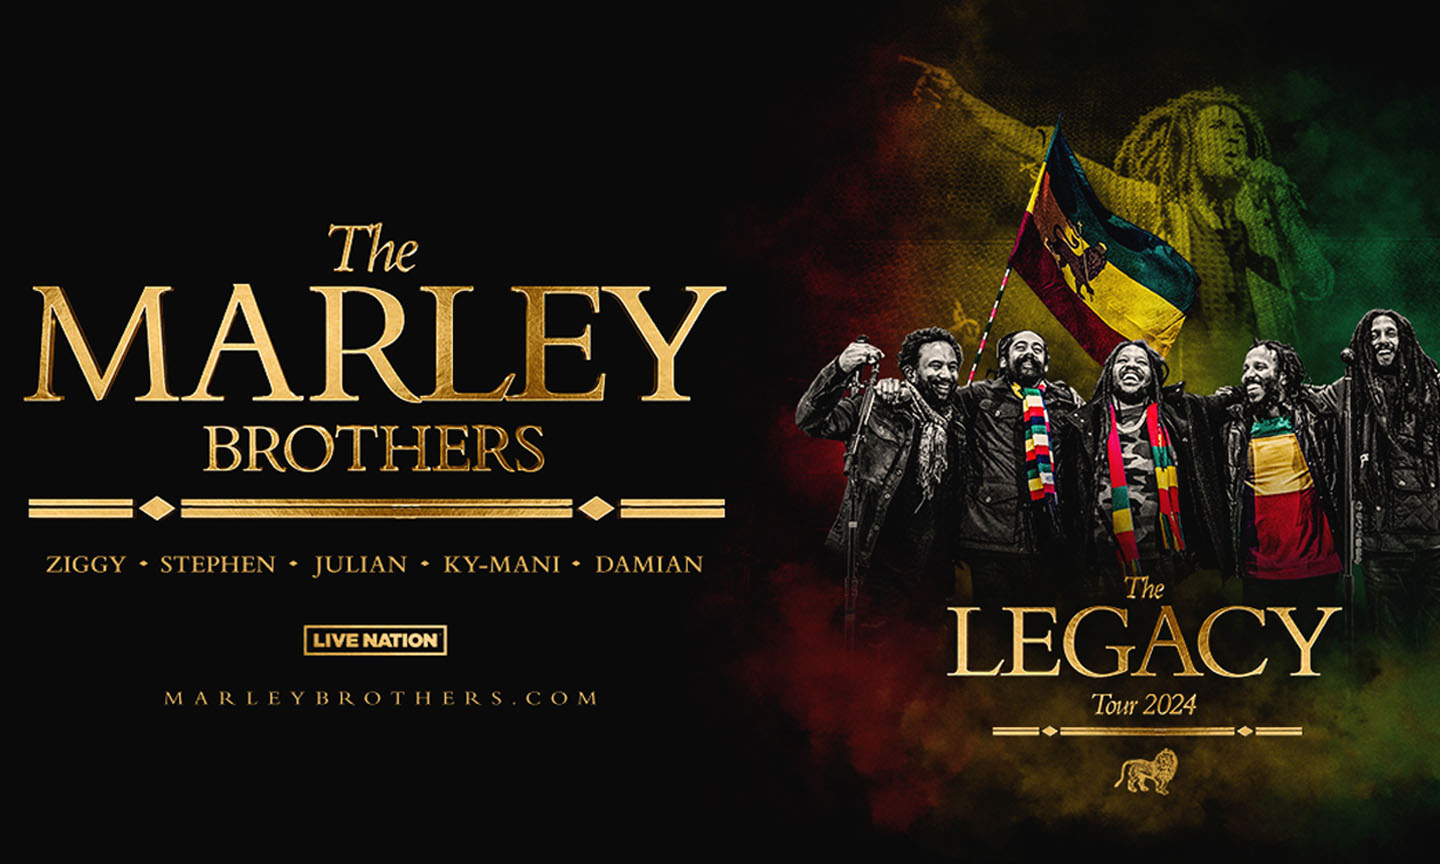 The Marley Brothers Announce ‘The Legacy Tour’